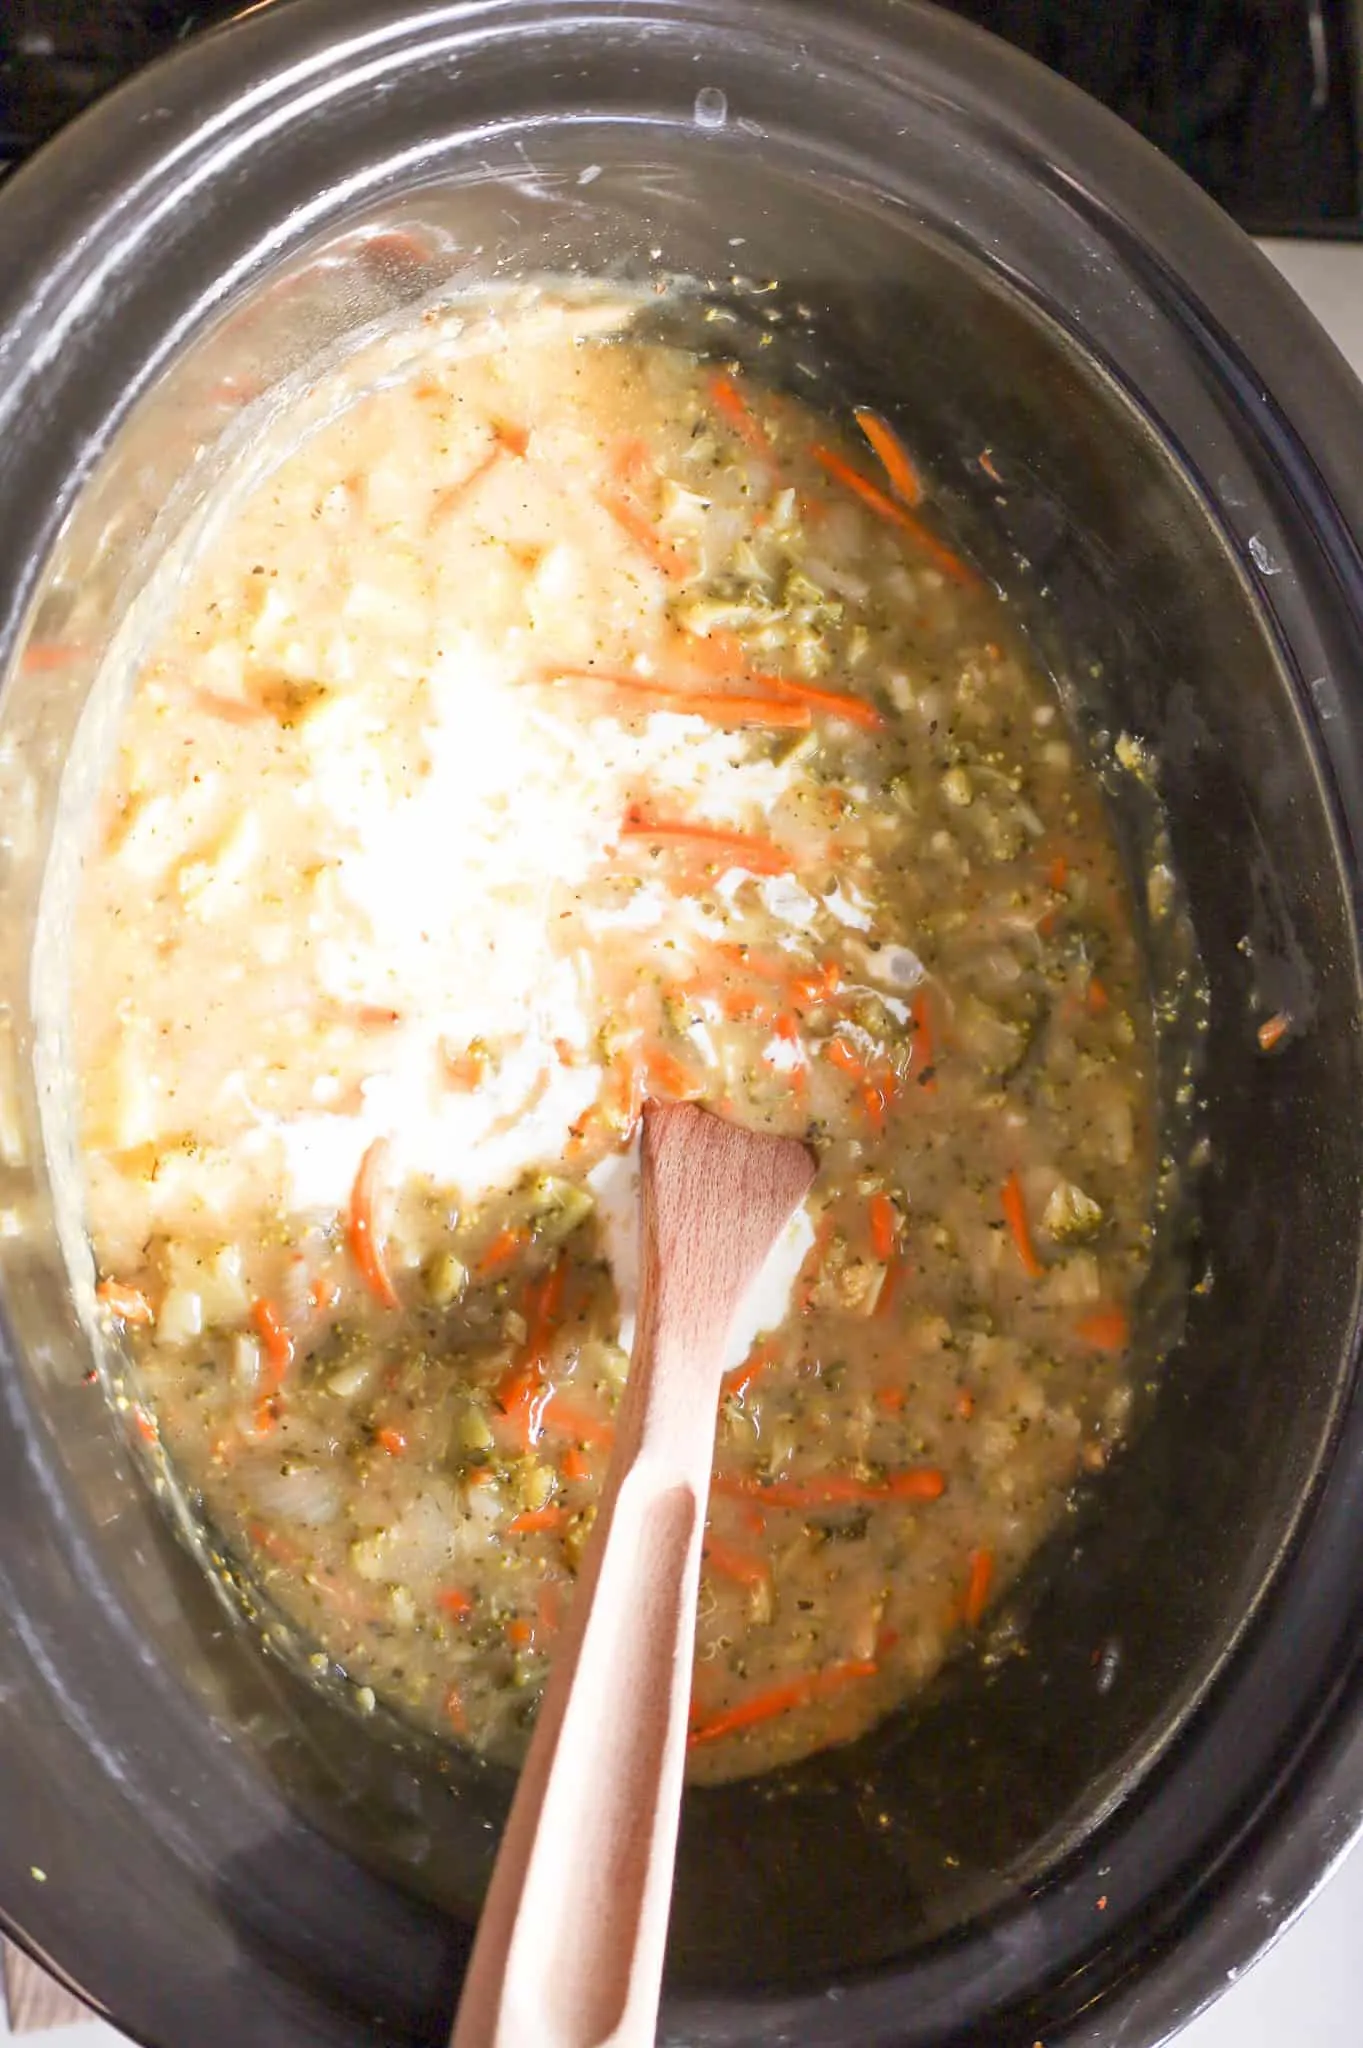 heaving cream added to crock pot with cooked broccoli soup ingredients